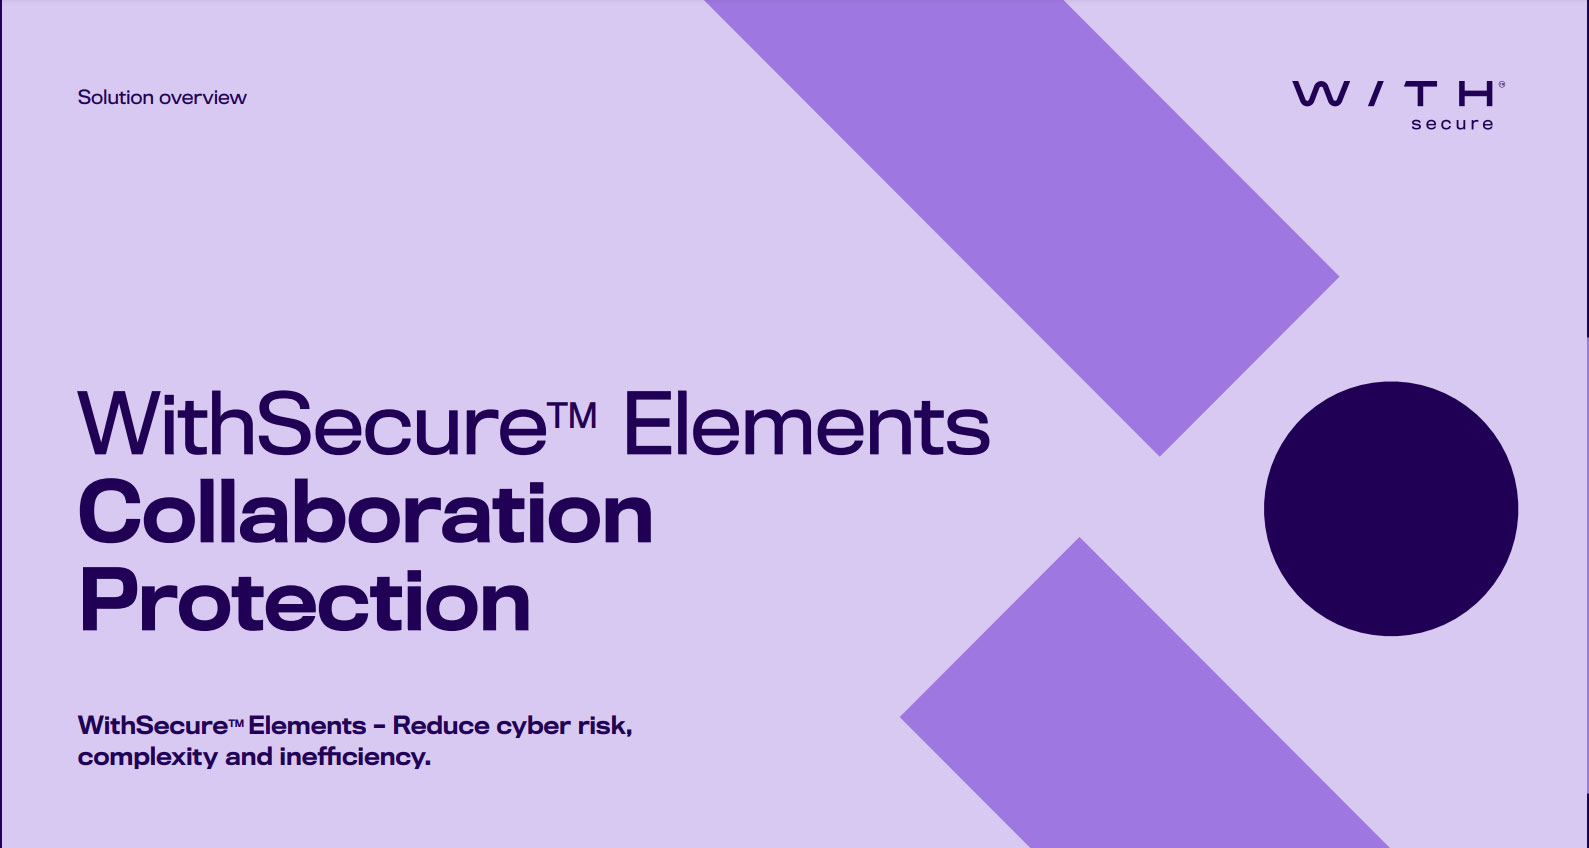 WS_elements_collaboration_protection_solution_overview_EN